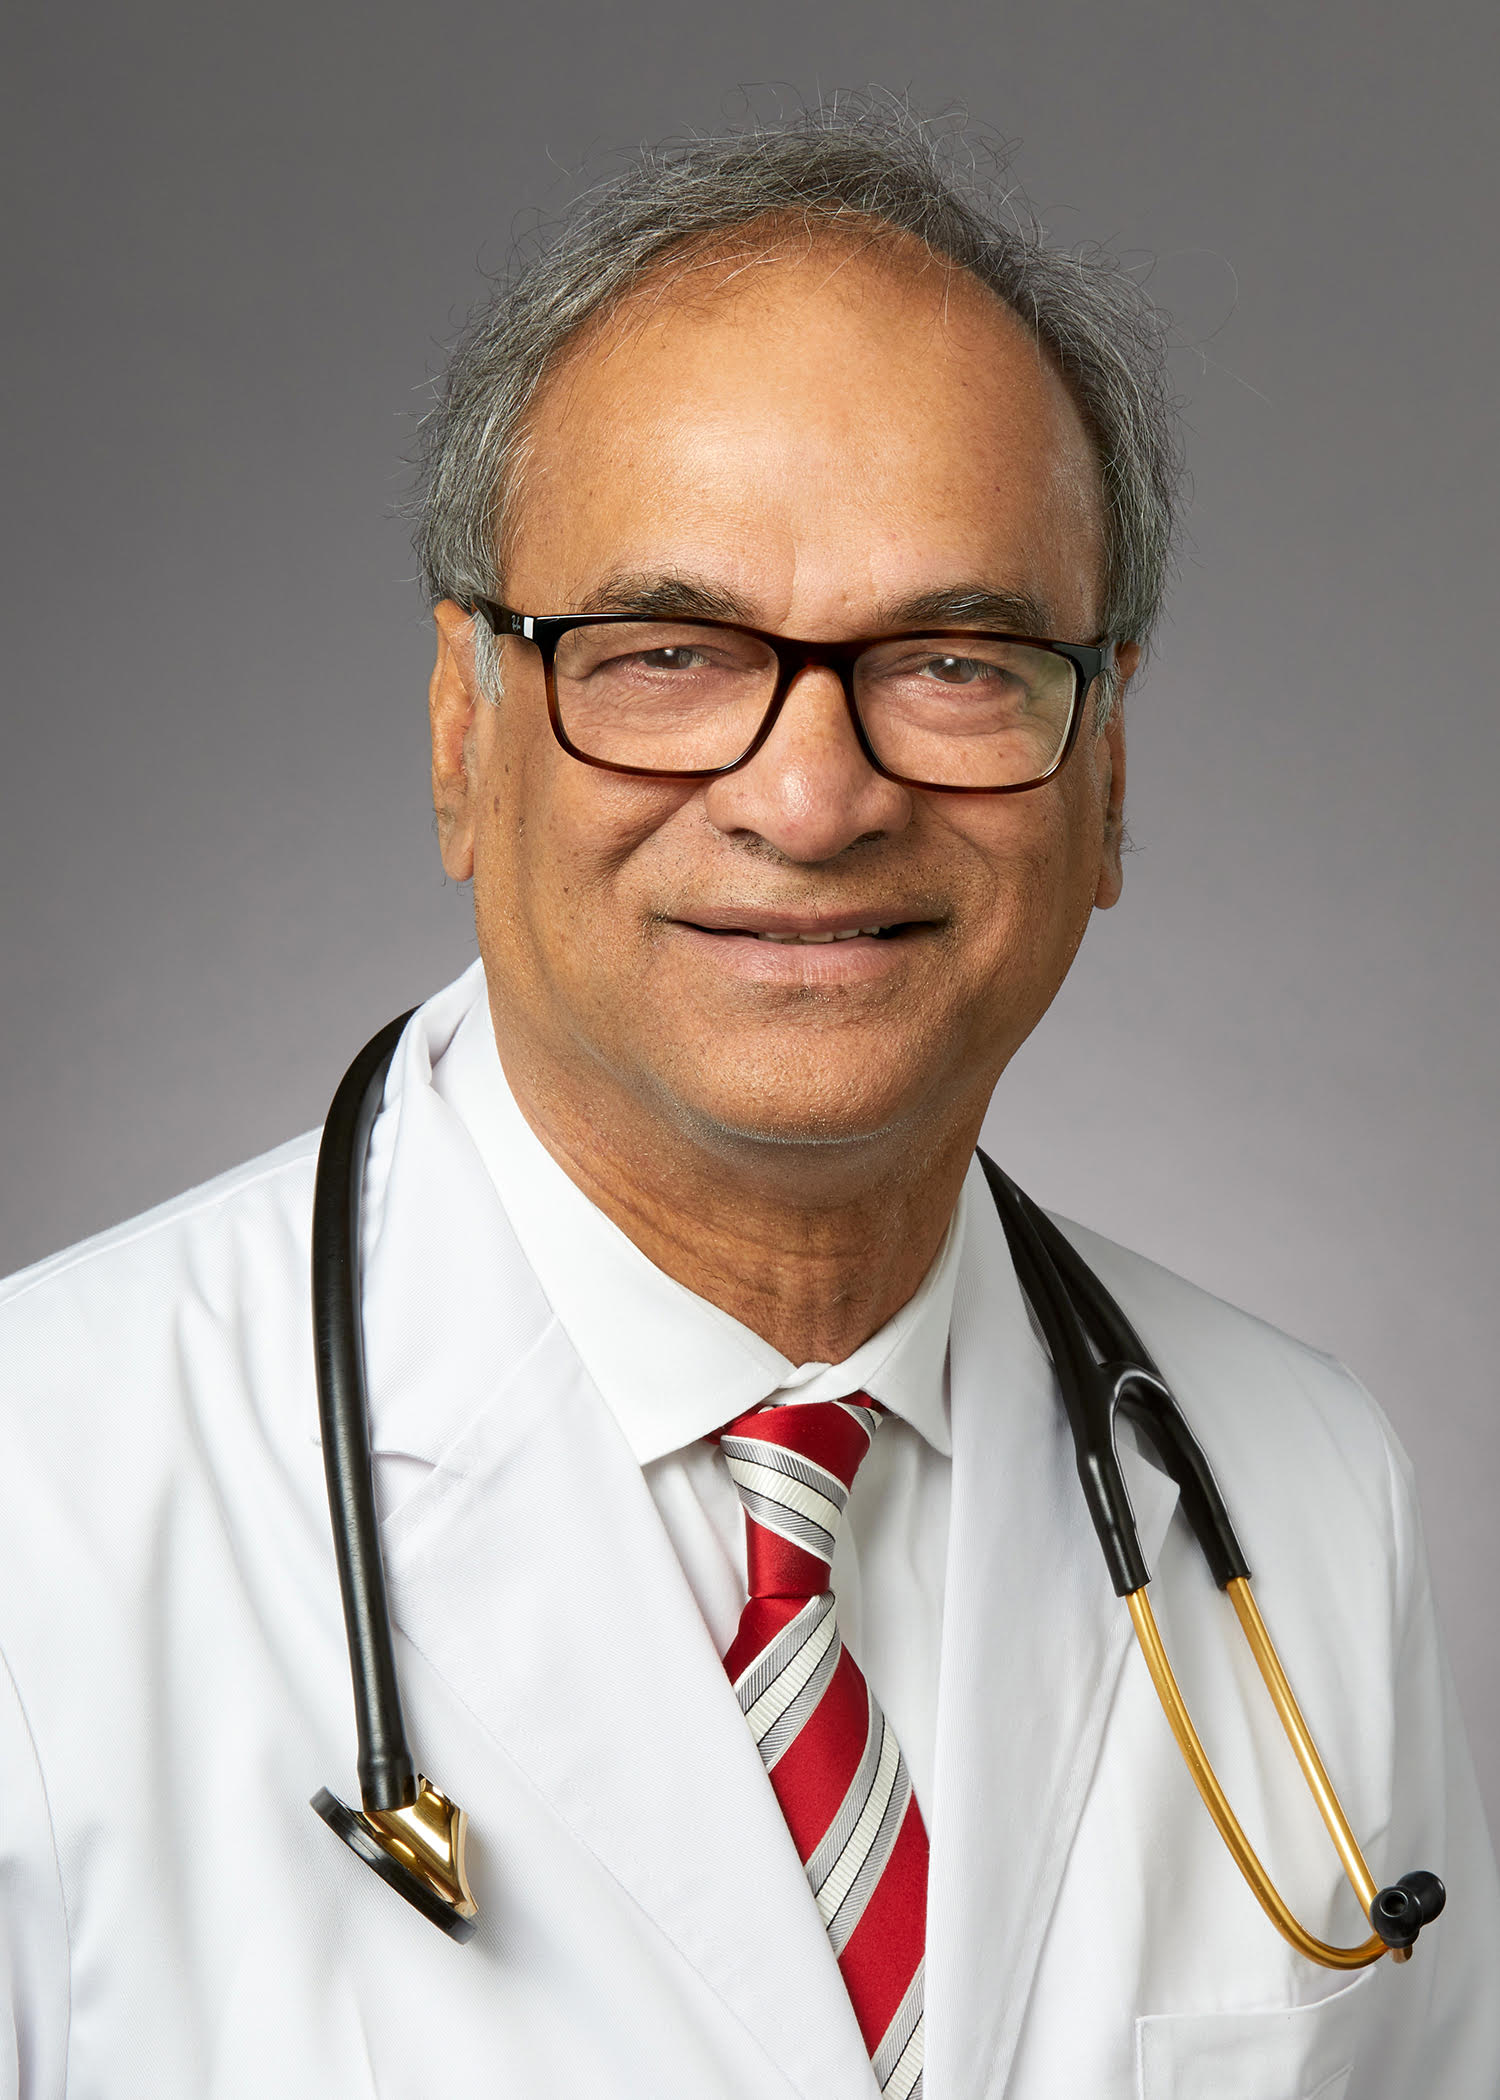 Dr. Chowdhry, Cardiologist at Padder Health